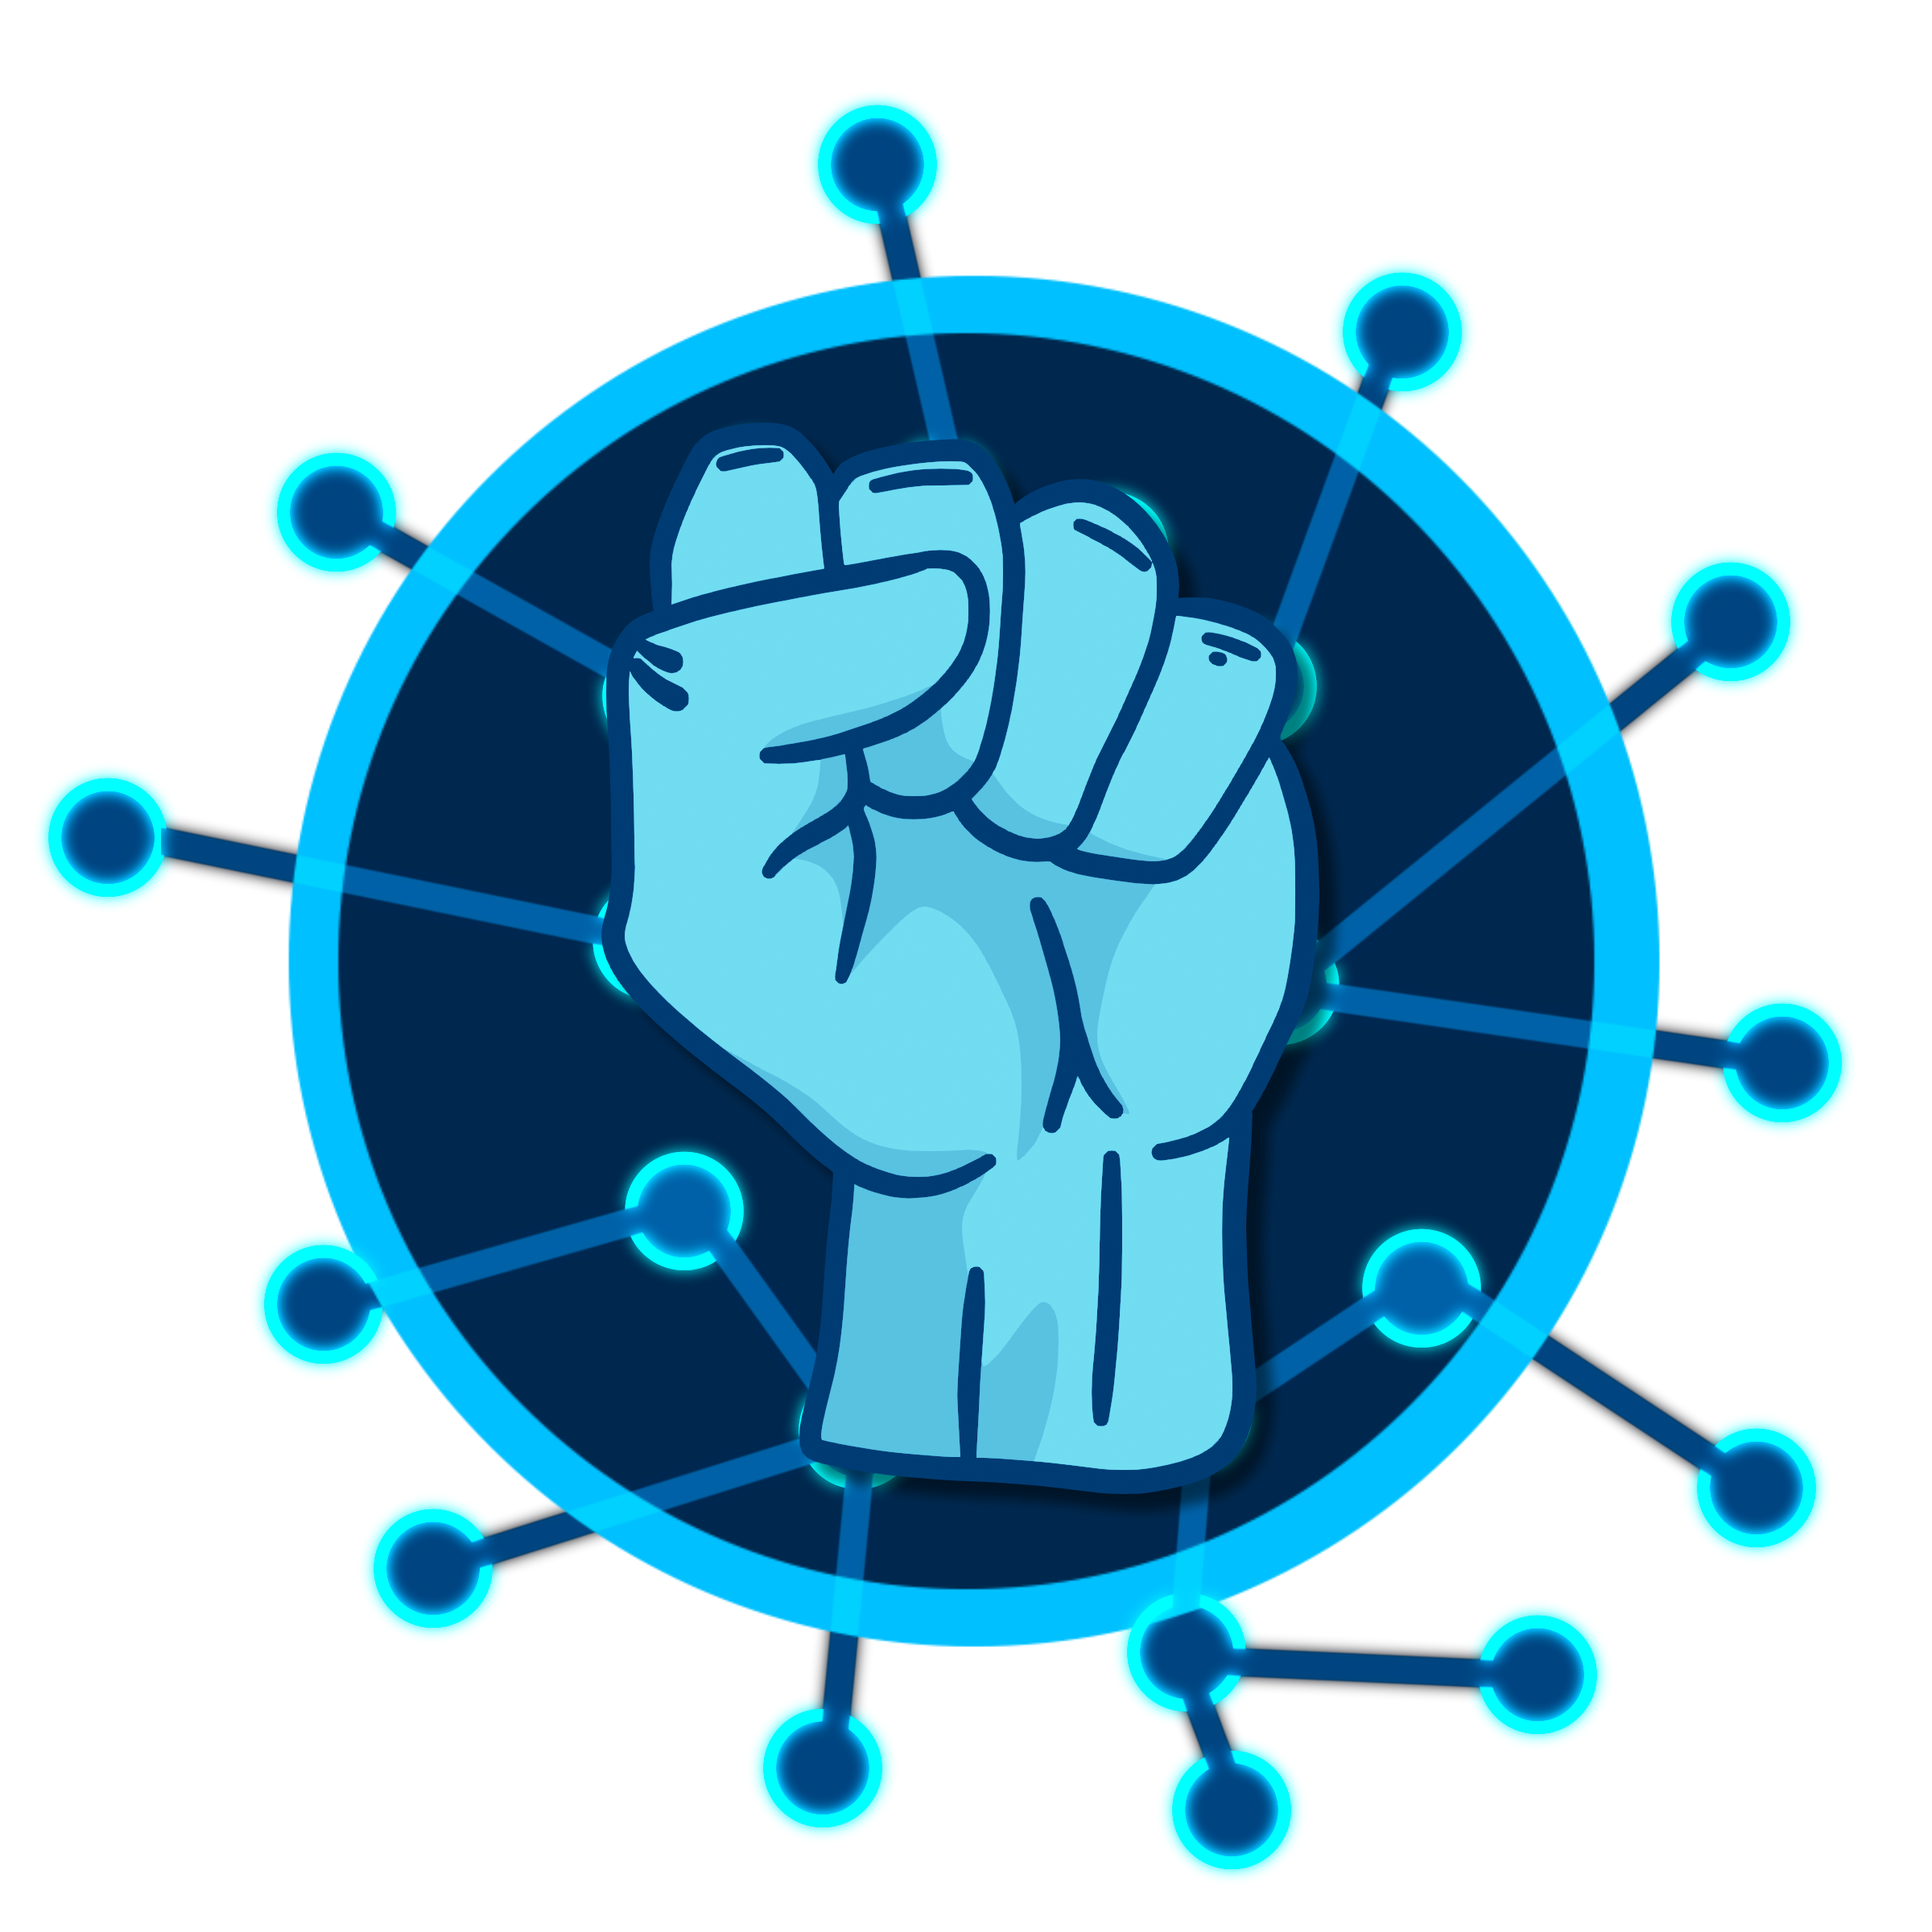 The LaborDAO Logo is the traditional labor fist with decentralized nodes behind it.